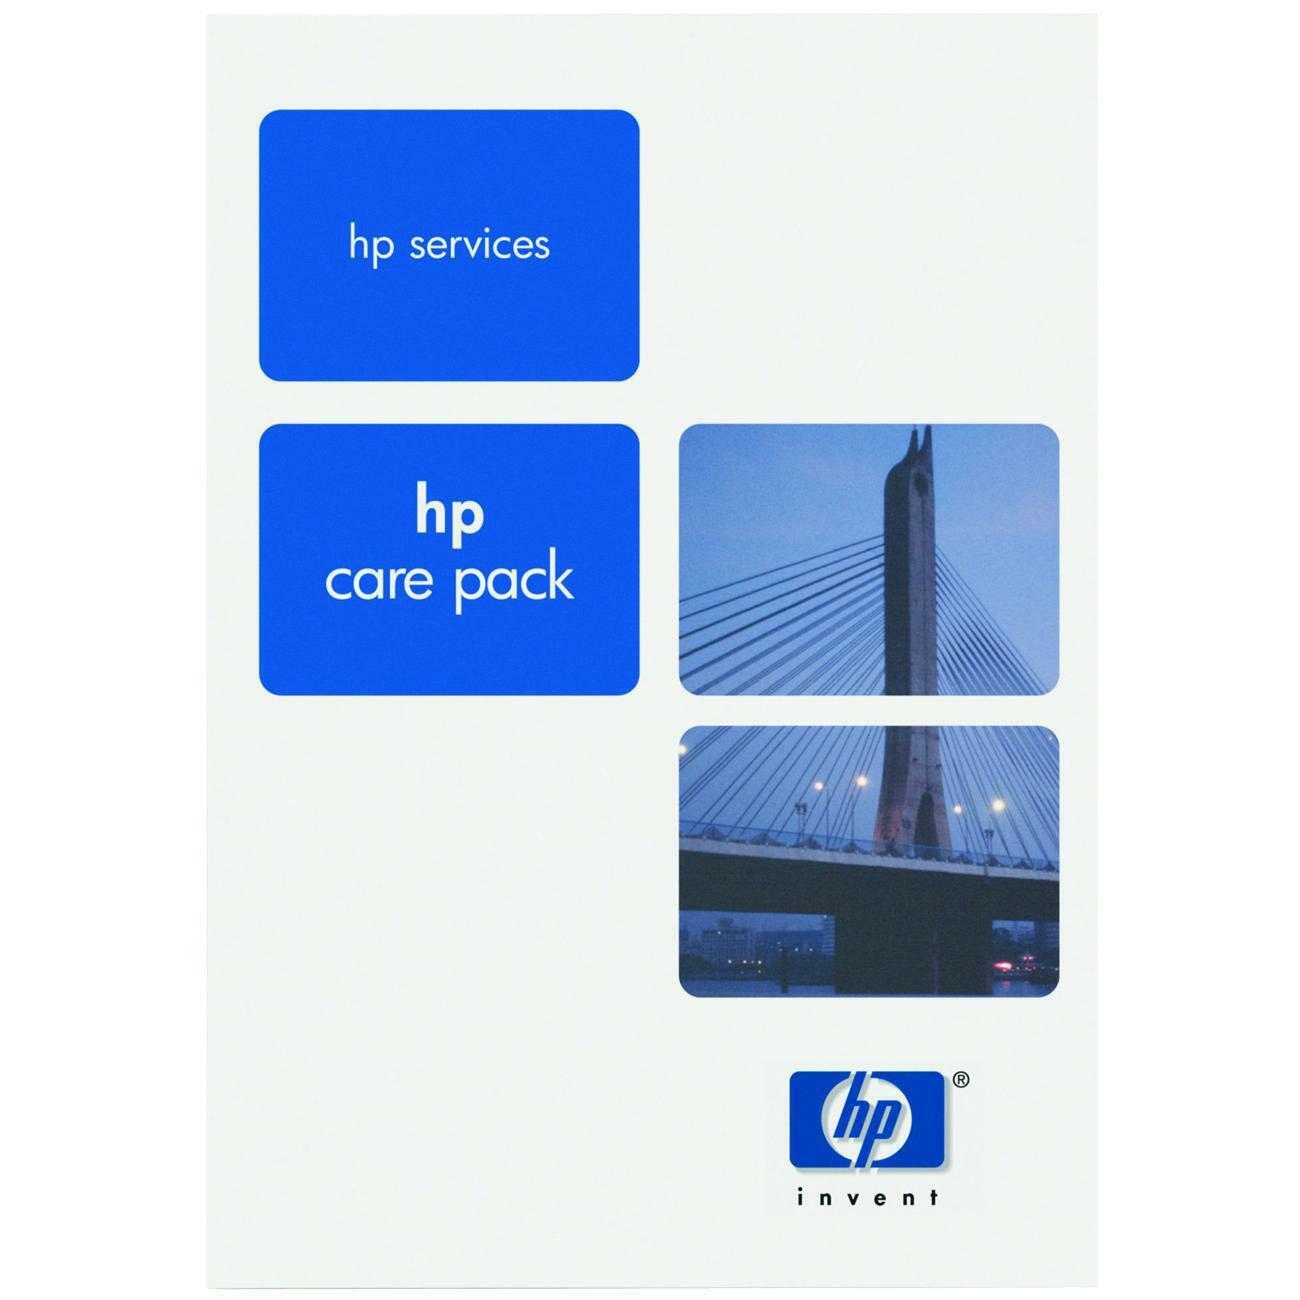 HP Care Pack, 1 Incident, Service - image 1 of 2